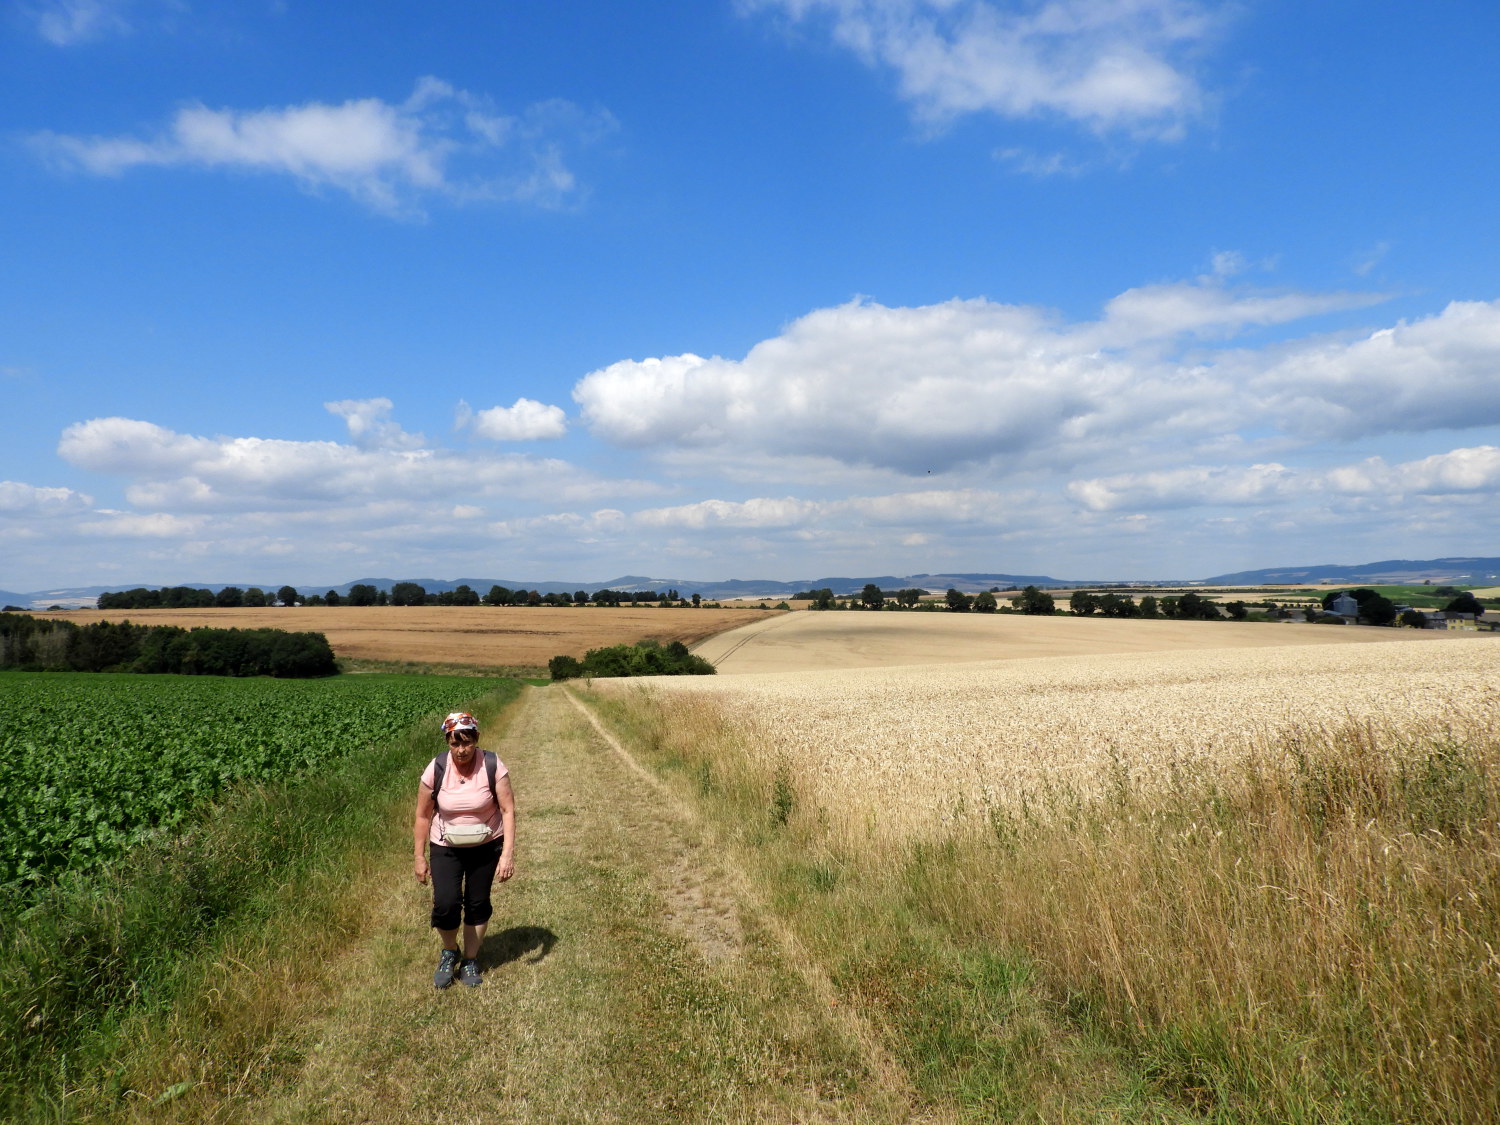 Another stretch of arable field walking